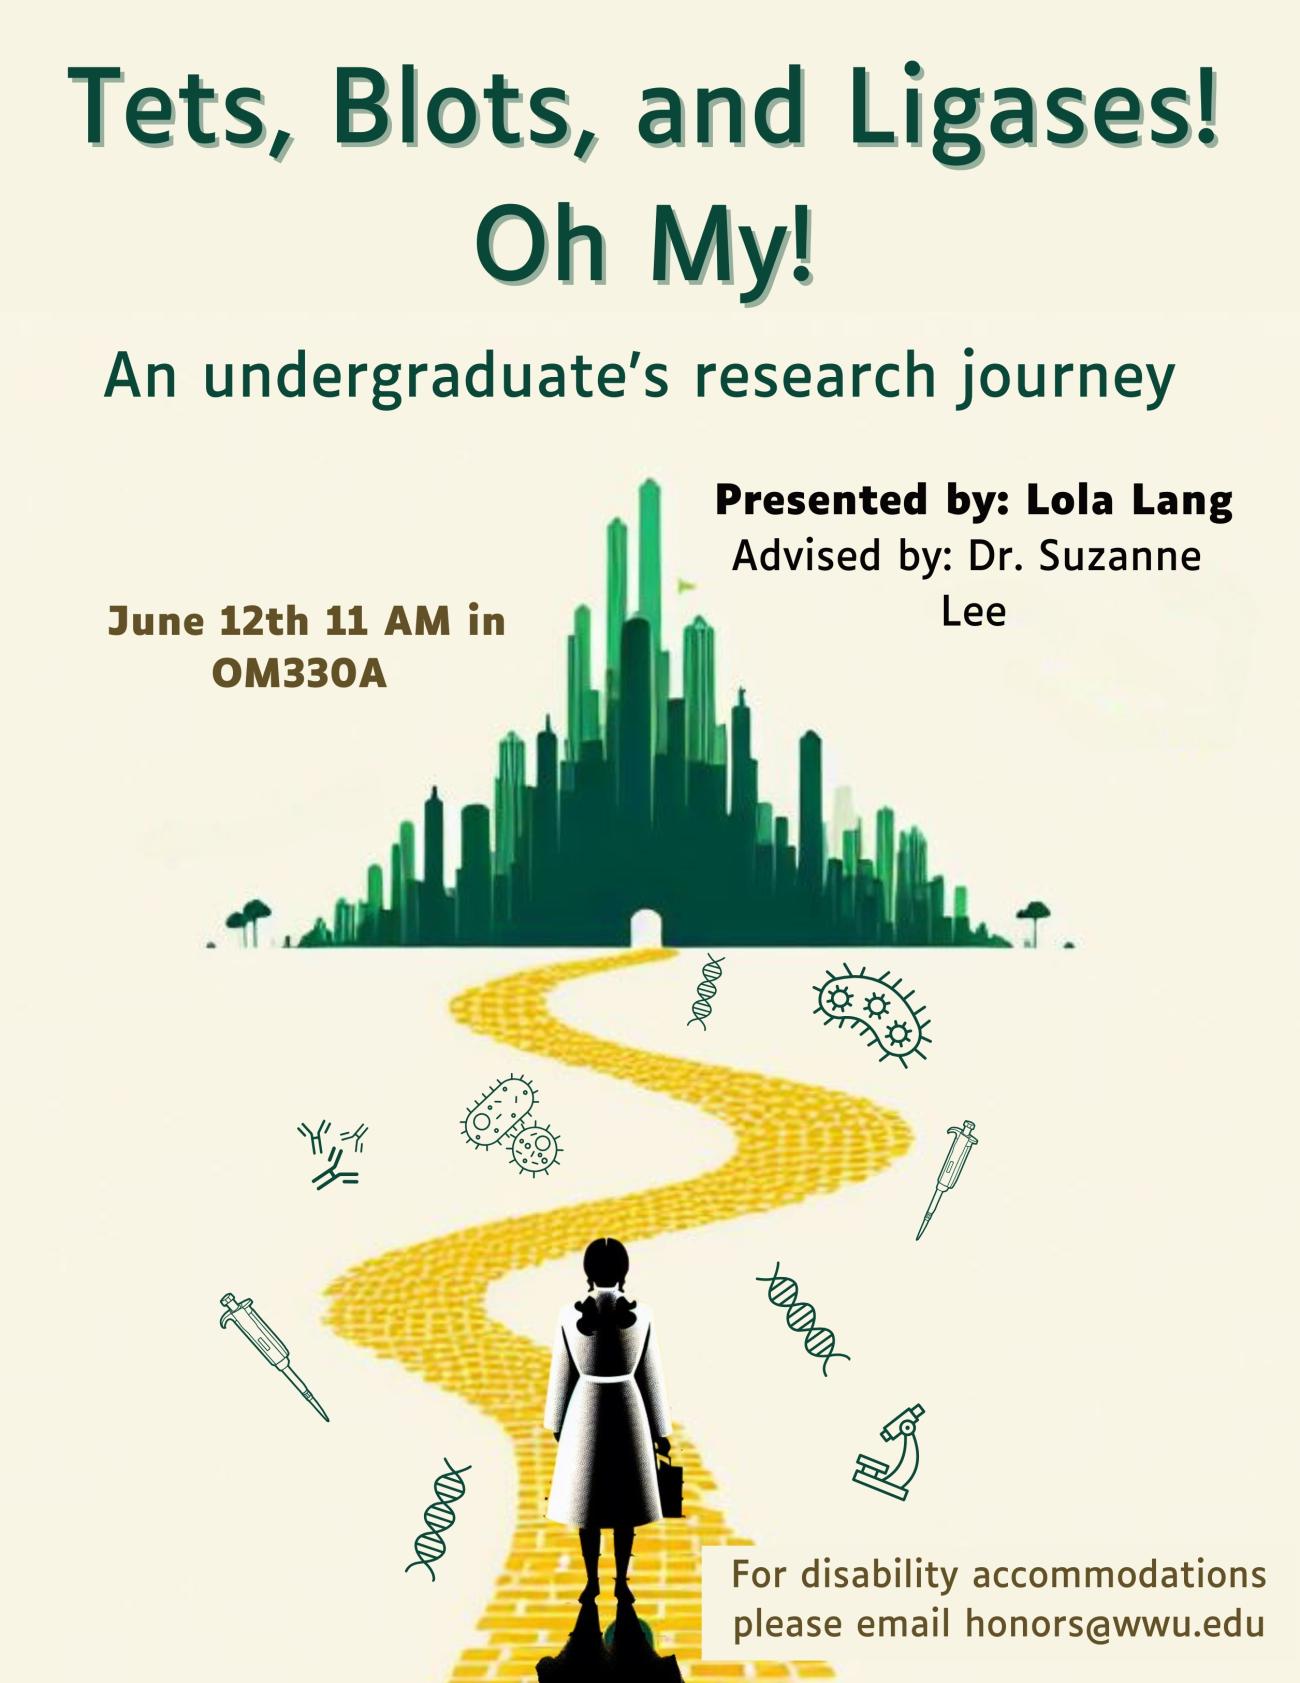 A tan background features a yellow brick road leading to an outline of the Wizard of Oz. A silhouette of Dorothy, in a lab coat, stands at the road's start. The path includes pipettes, DNA, antibodies, cells, and a microscope. Text reads “Tets, Blots, and Ligases! Oh My! An undergraduate’s research journey. Presented by Lola Lang, Advised by Dr. Suzanne Lee. June 12th 11 AM in OM330A. For disability accommodations please email honors@wwu.edu”